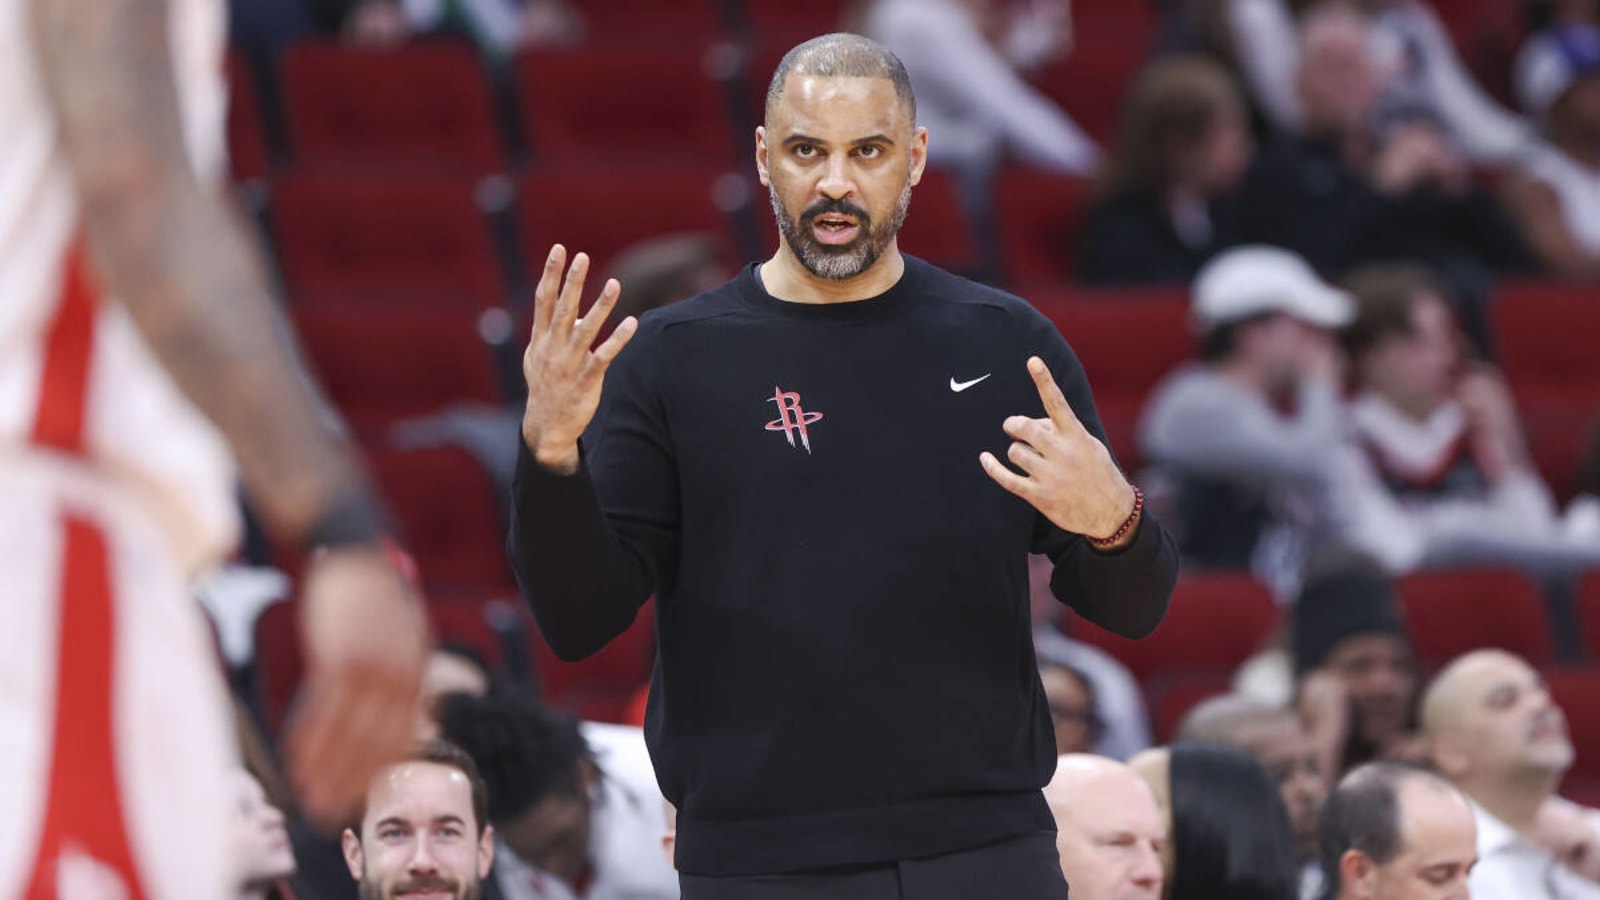 Houston Rockets Coach Ime Udoka Not to Make Changes to Starting Lineup